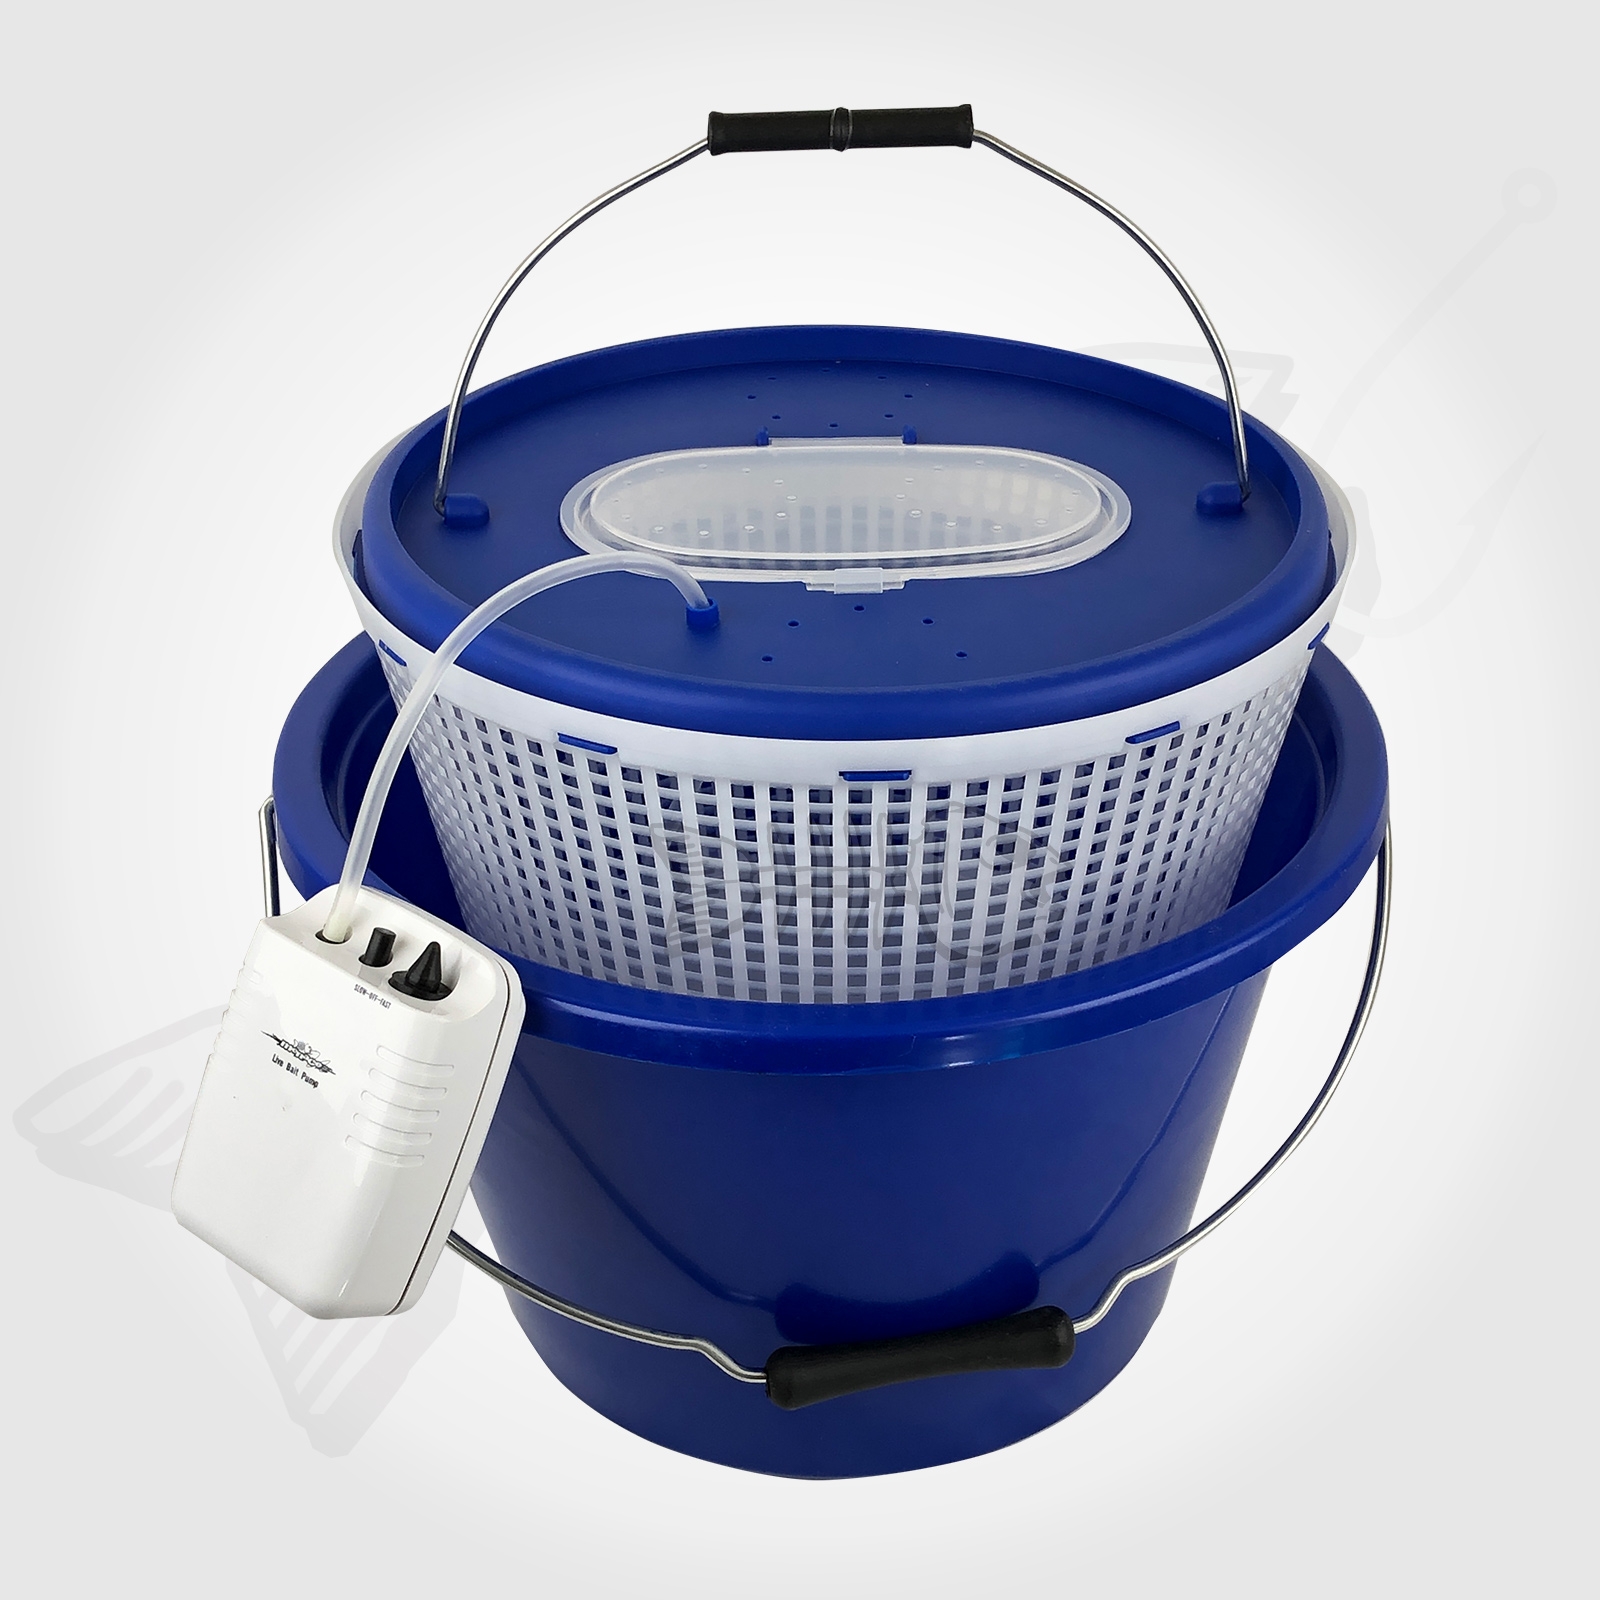 15L 3in1 LIVE BAIT BUCKET & Free Aerator Pump - 120+ hrs run time - 2 speed